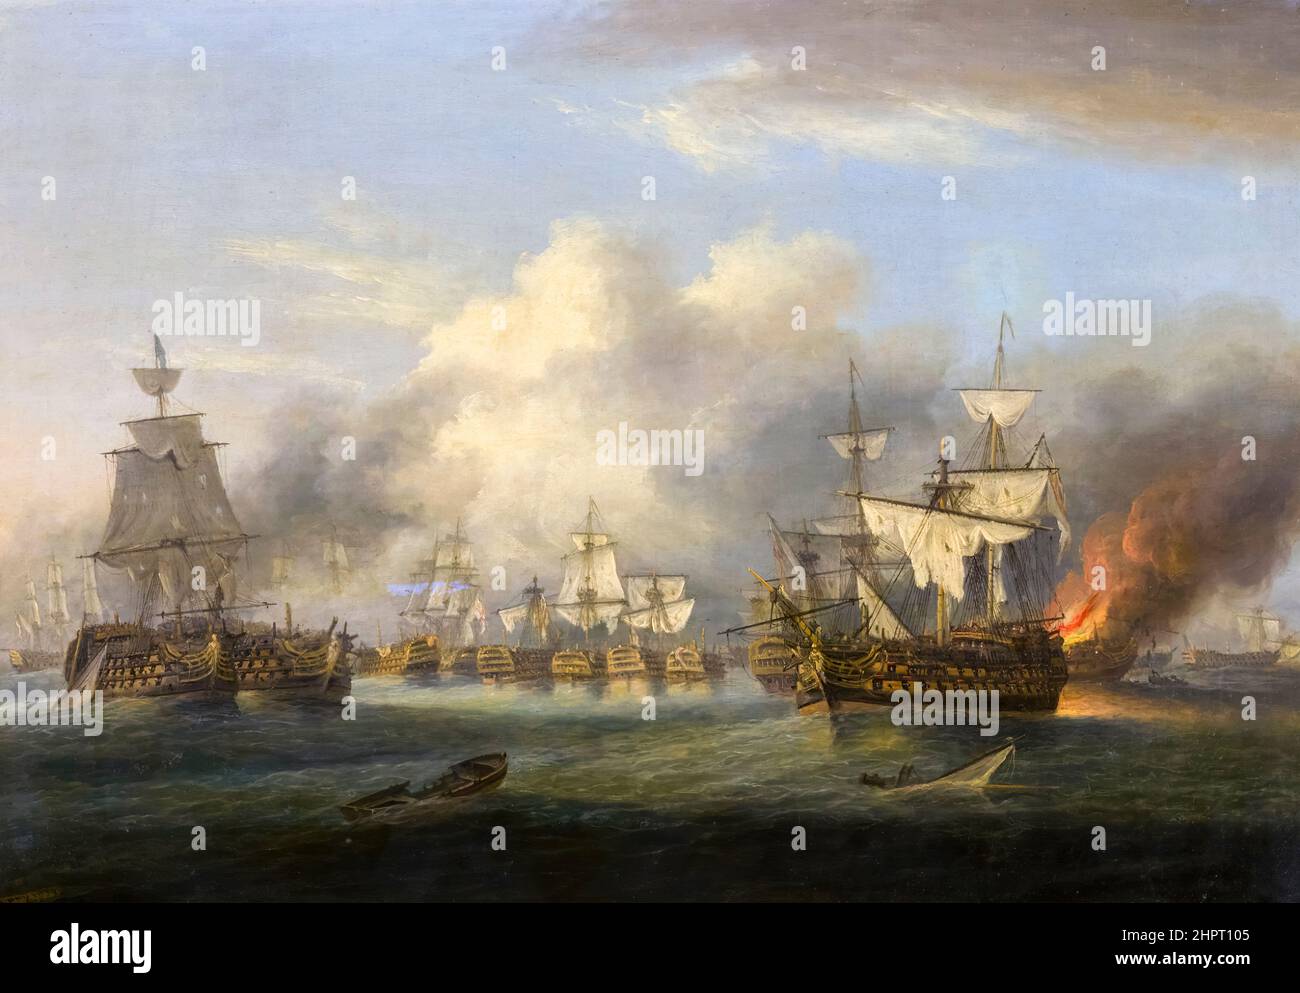 End of the Battle of Trafalgar, 1805, oil on canvas painting by Thomas Luny, 1834 Stock Photo